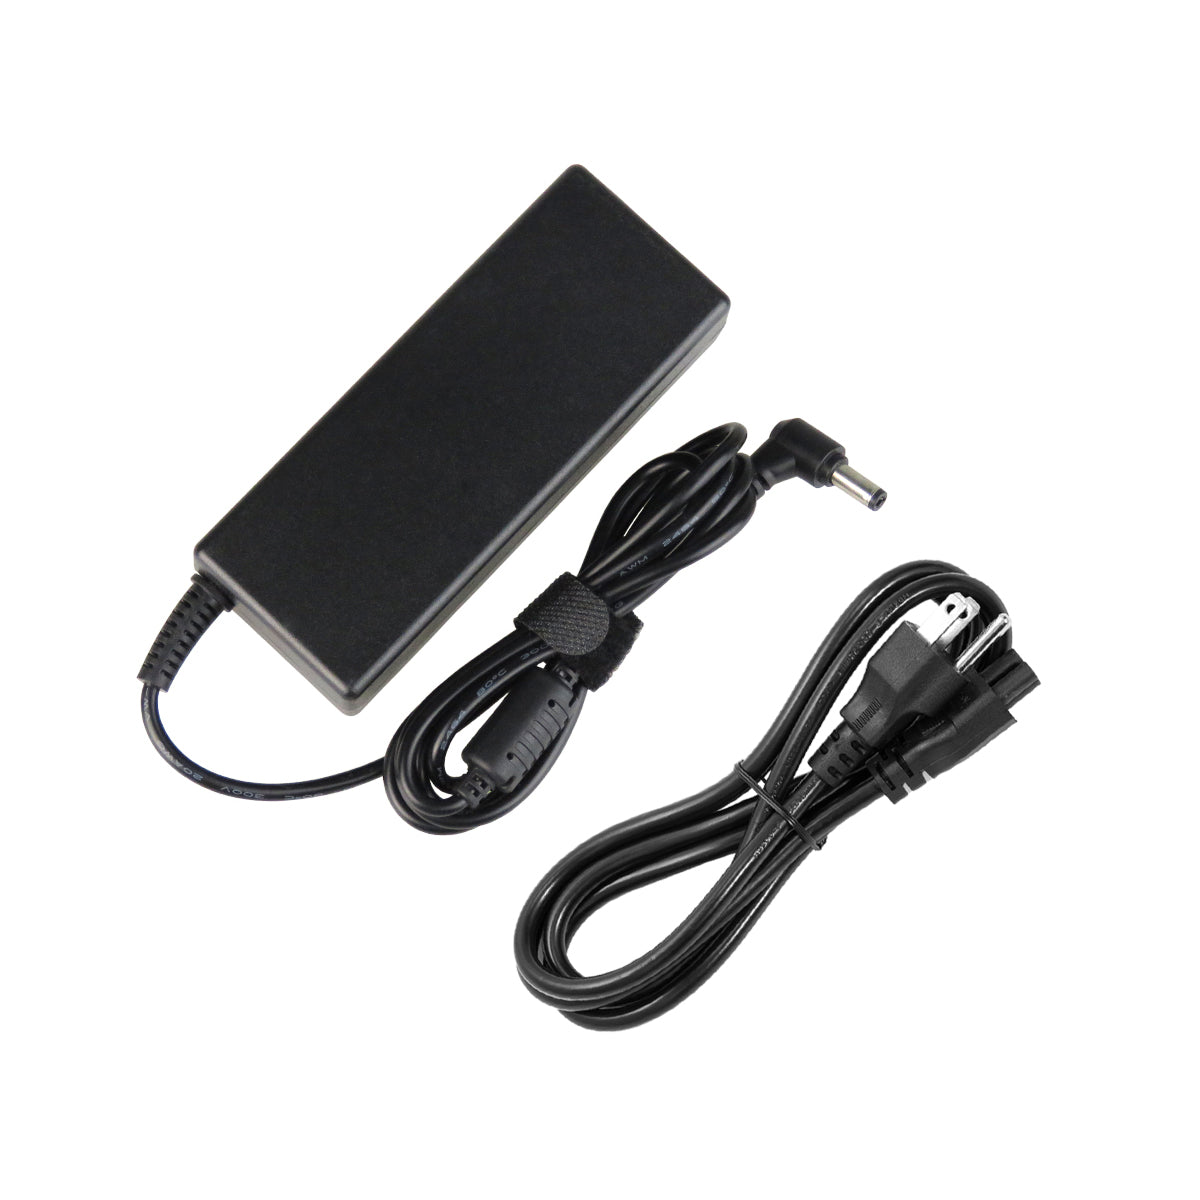 AC Adapter Charger for Toshiba Satellite l355 Notebook.